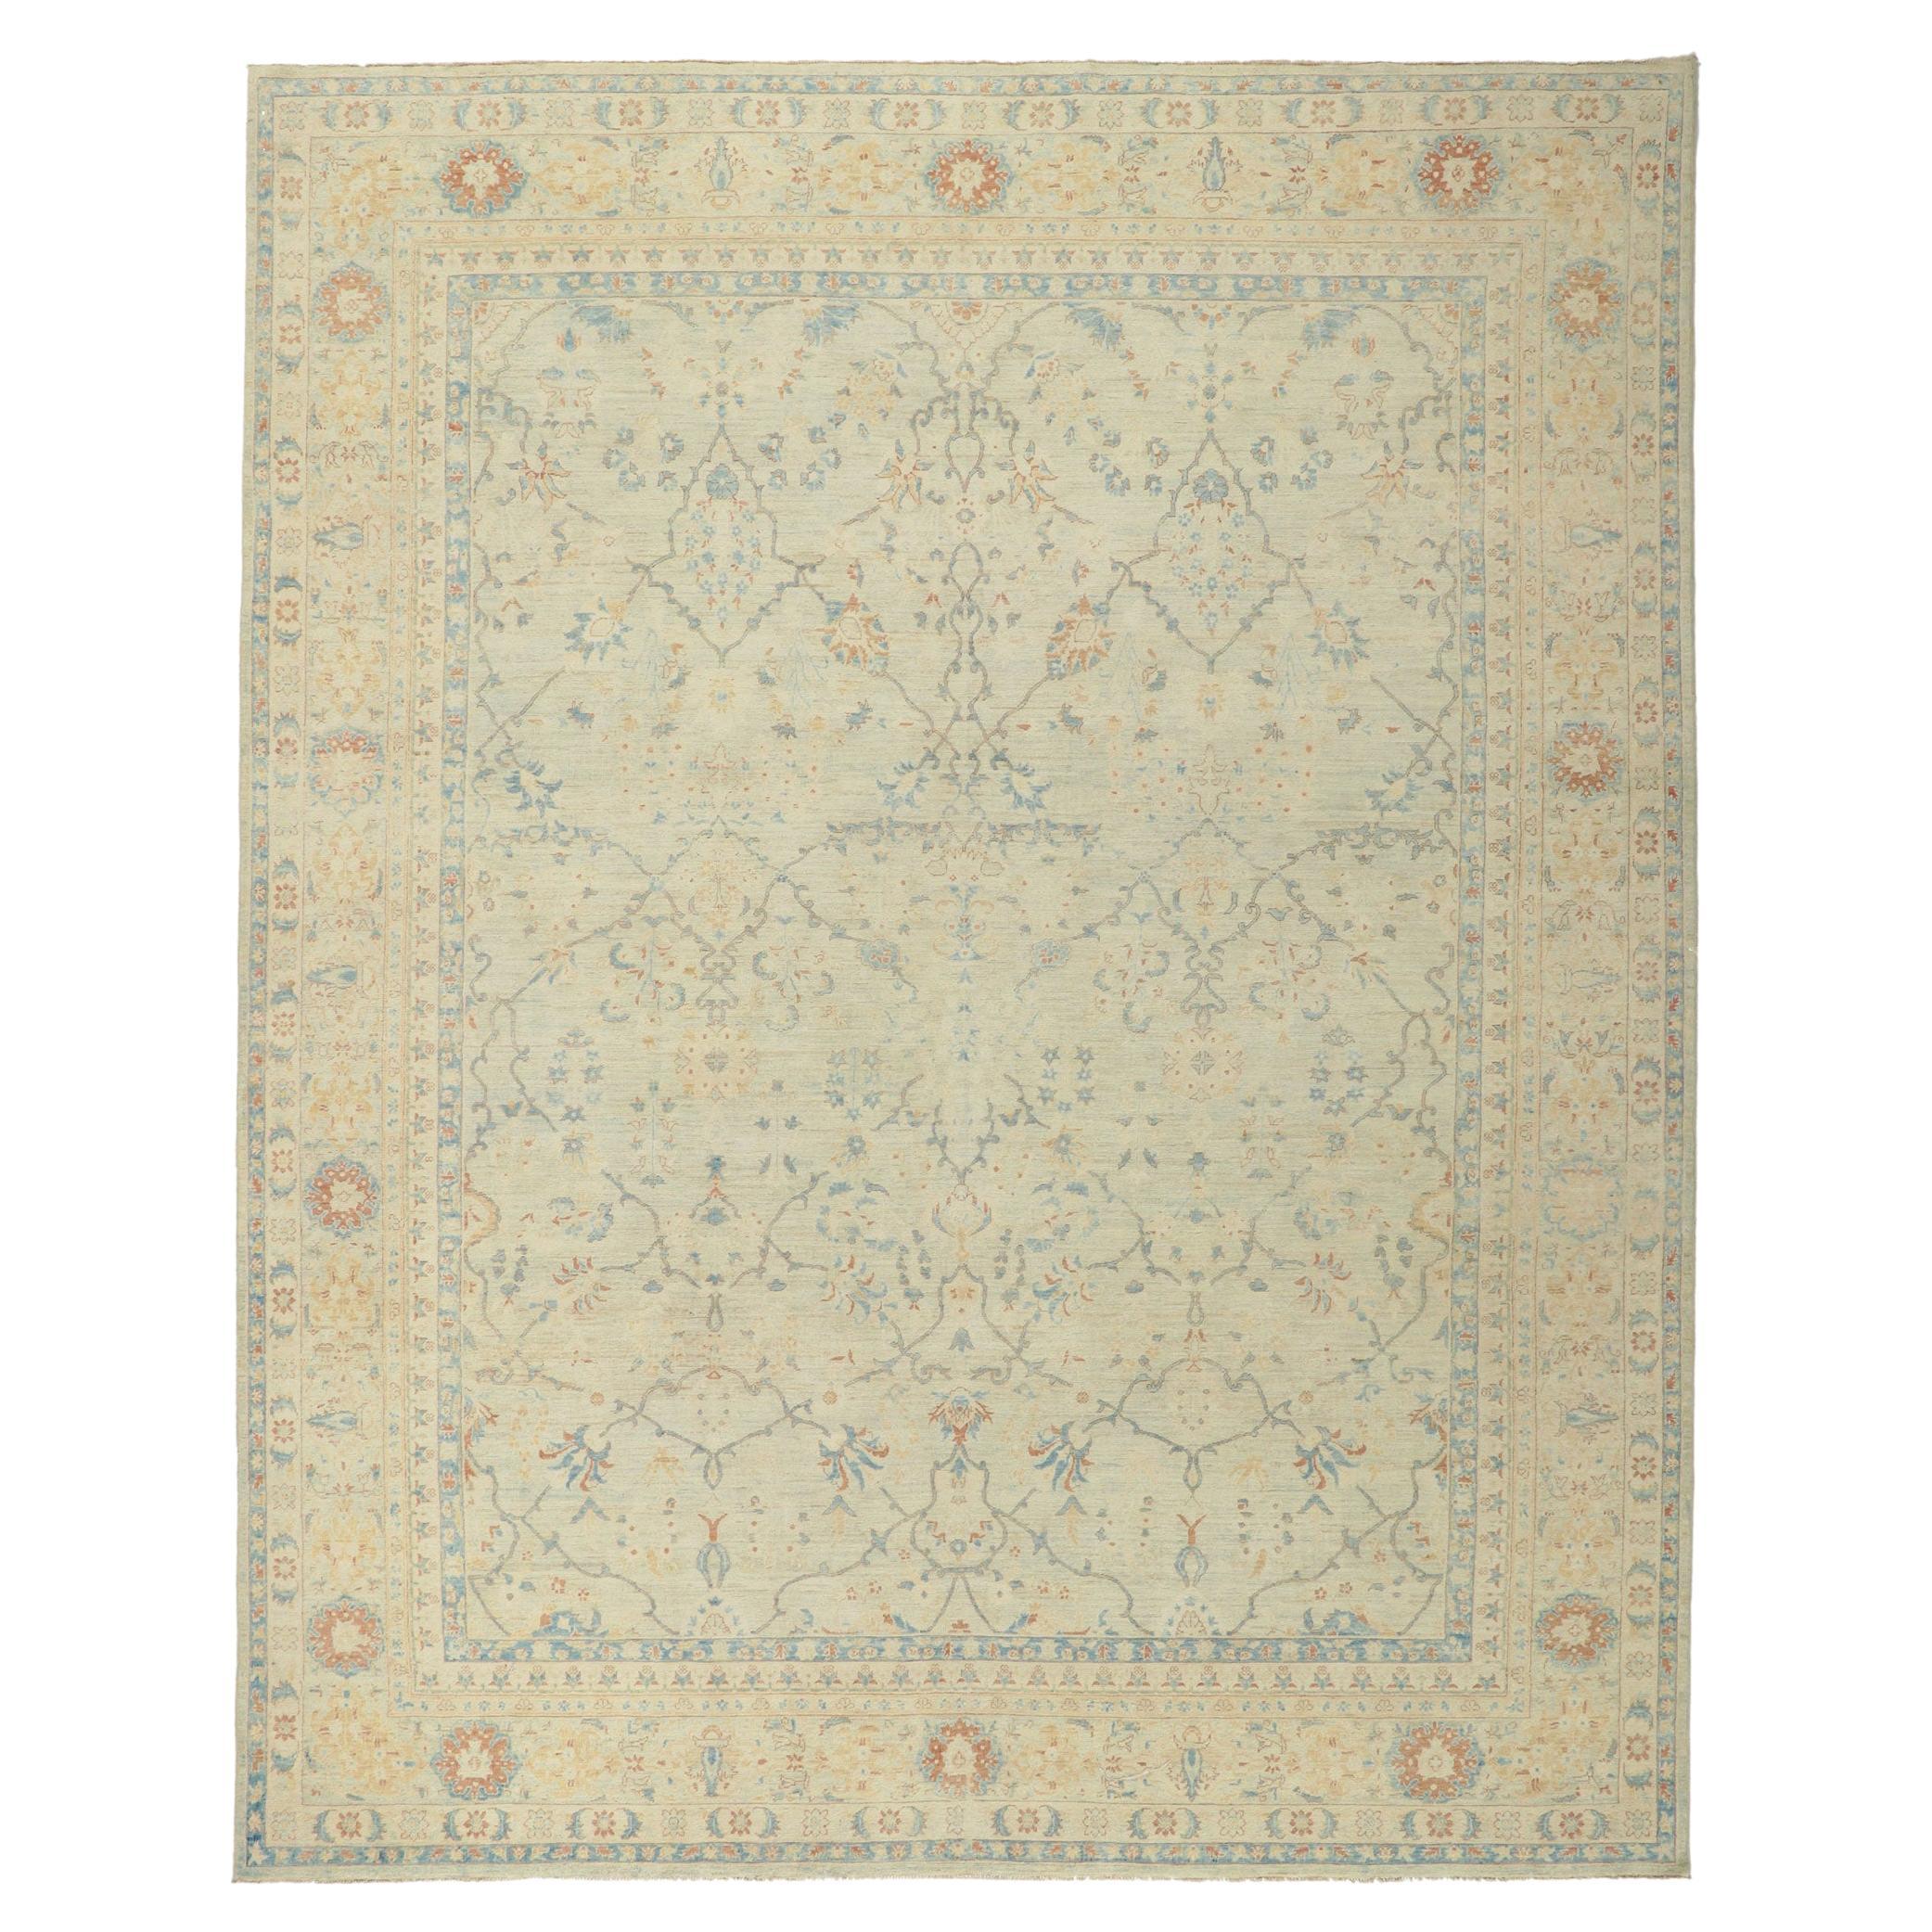 New Vintage-Inspired Oushak Rug with Modern Style For Sale